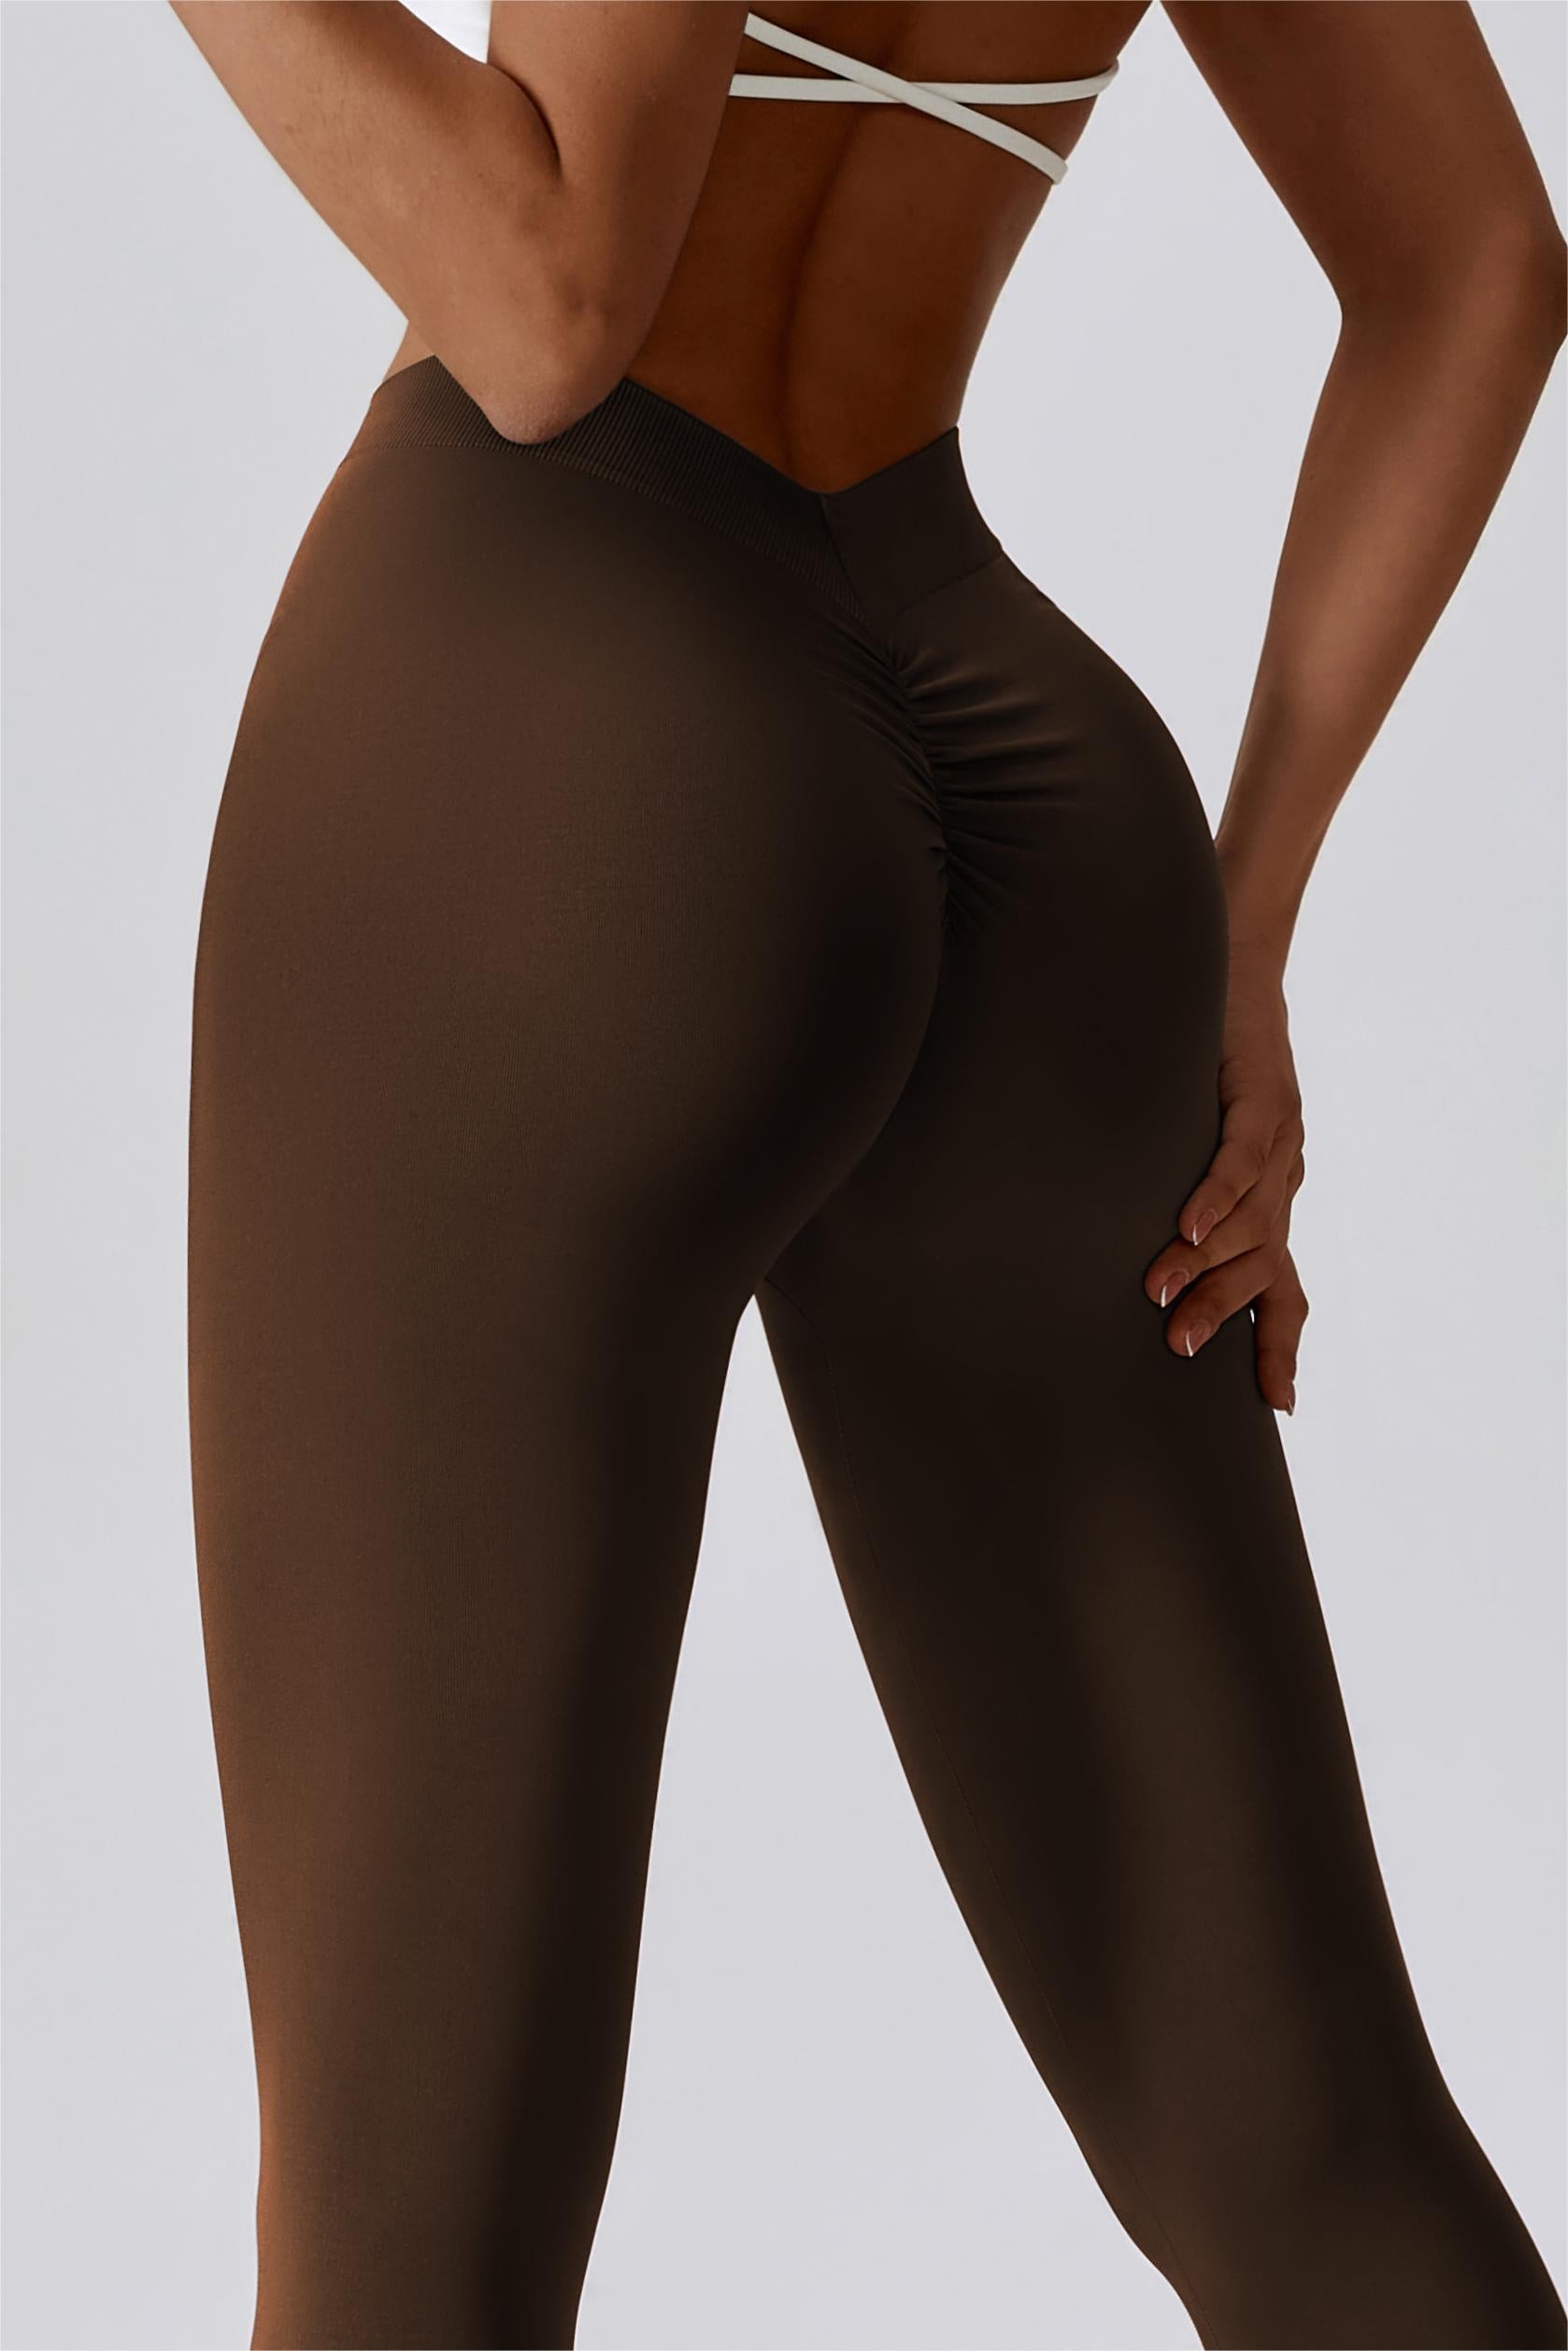 Scrunch Butt Low Waist Leggings For Women V Back, Thin Skin, Backless,  Booty Yoga Pants, Gym Tights, Sexy Lounge Club Wear From You01, $16.42